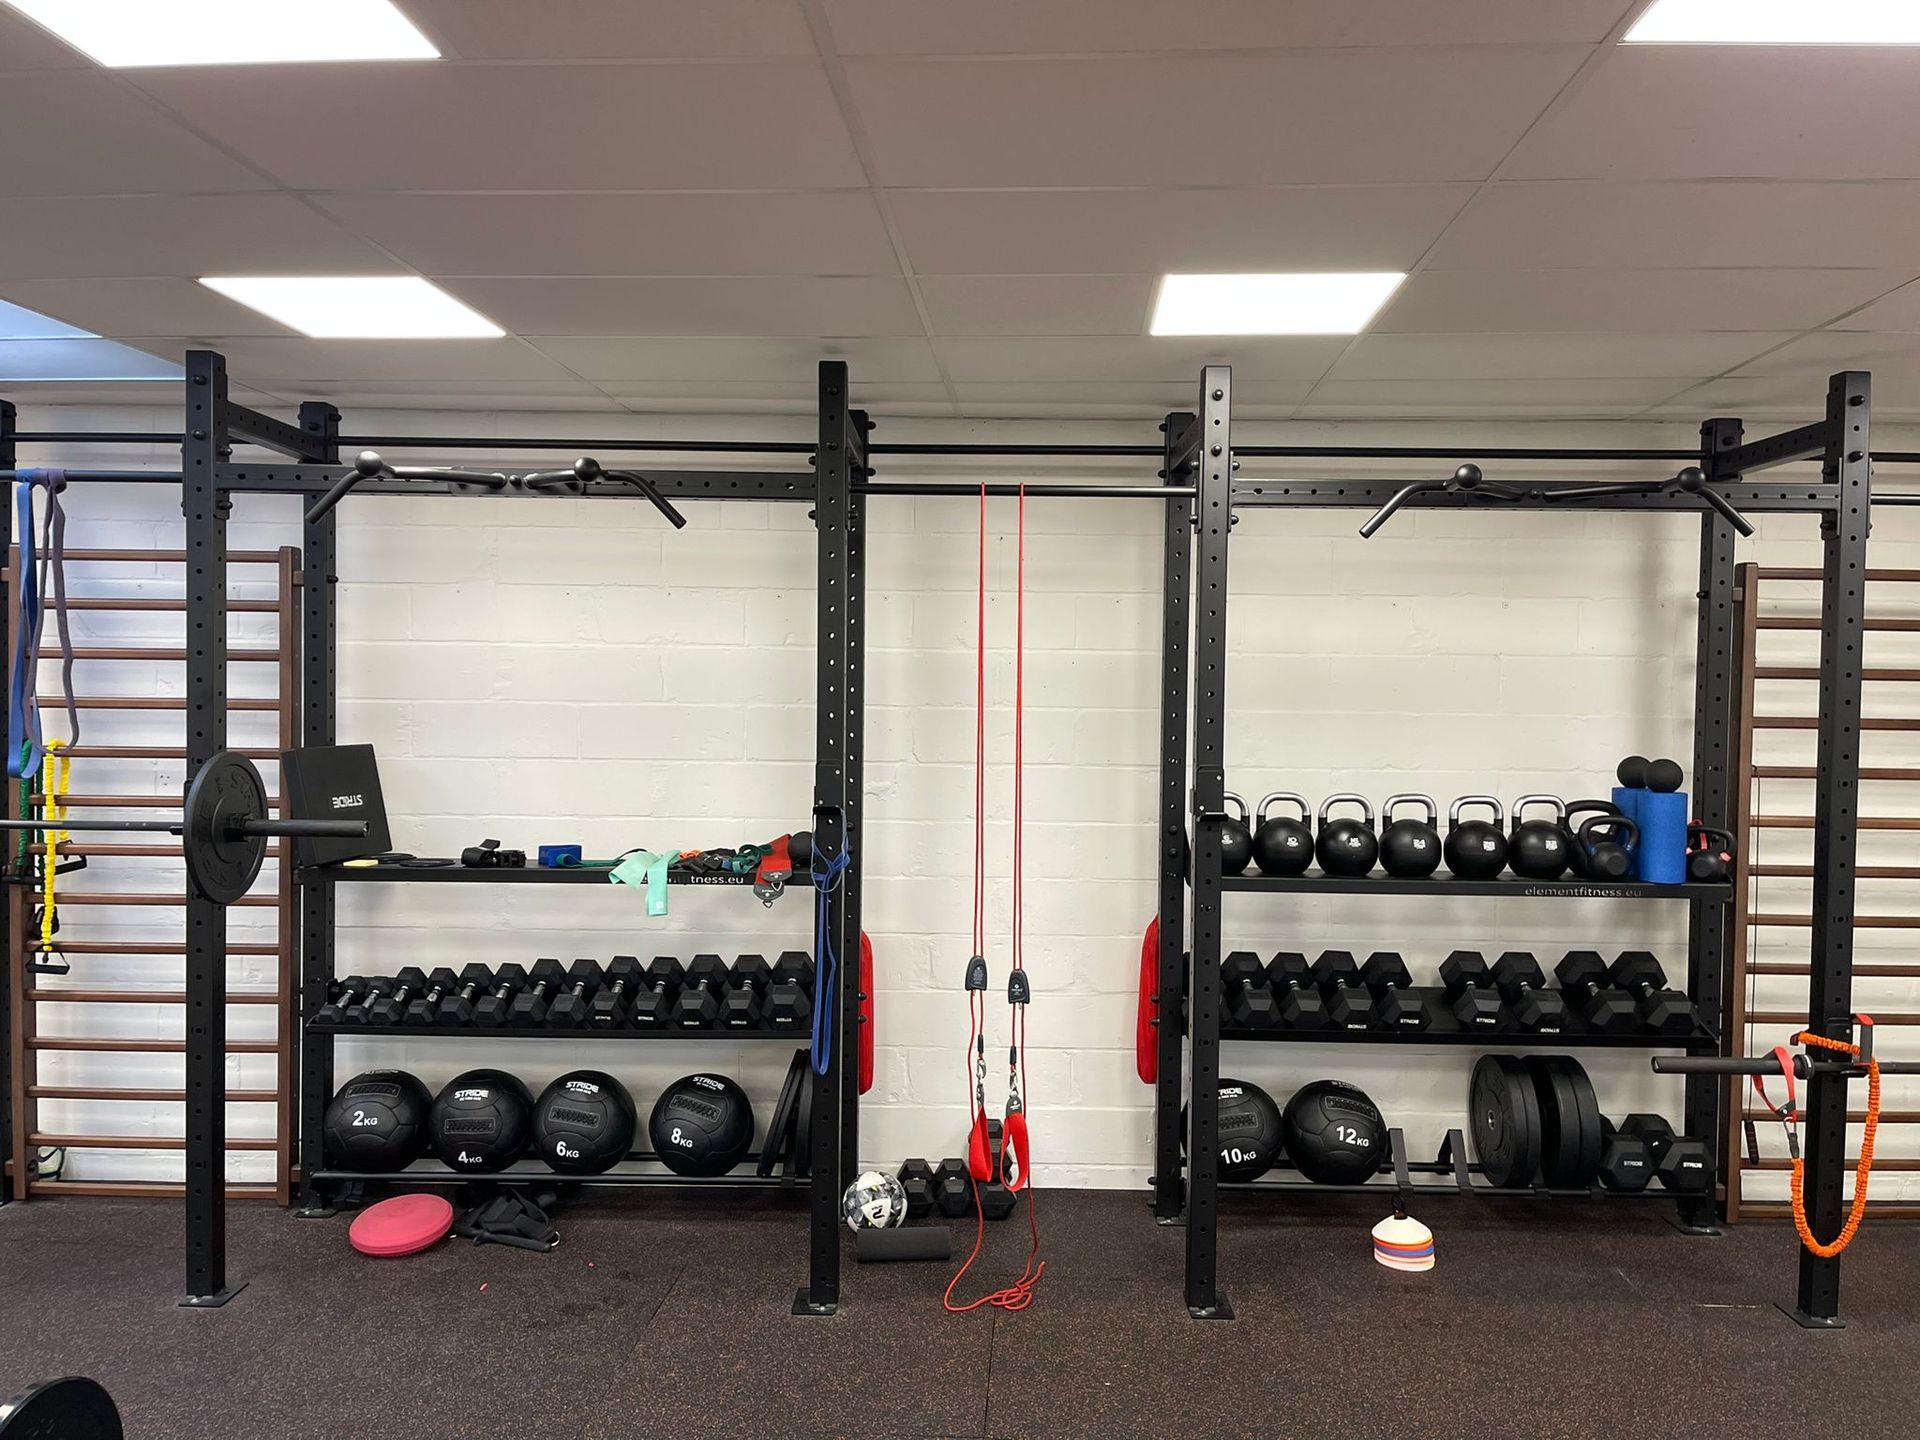 Gym weights properly placed in racks